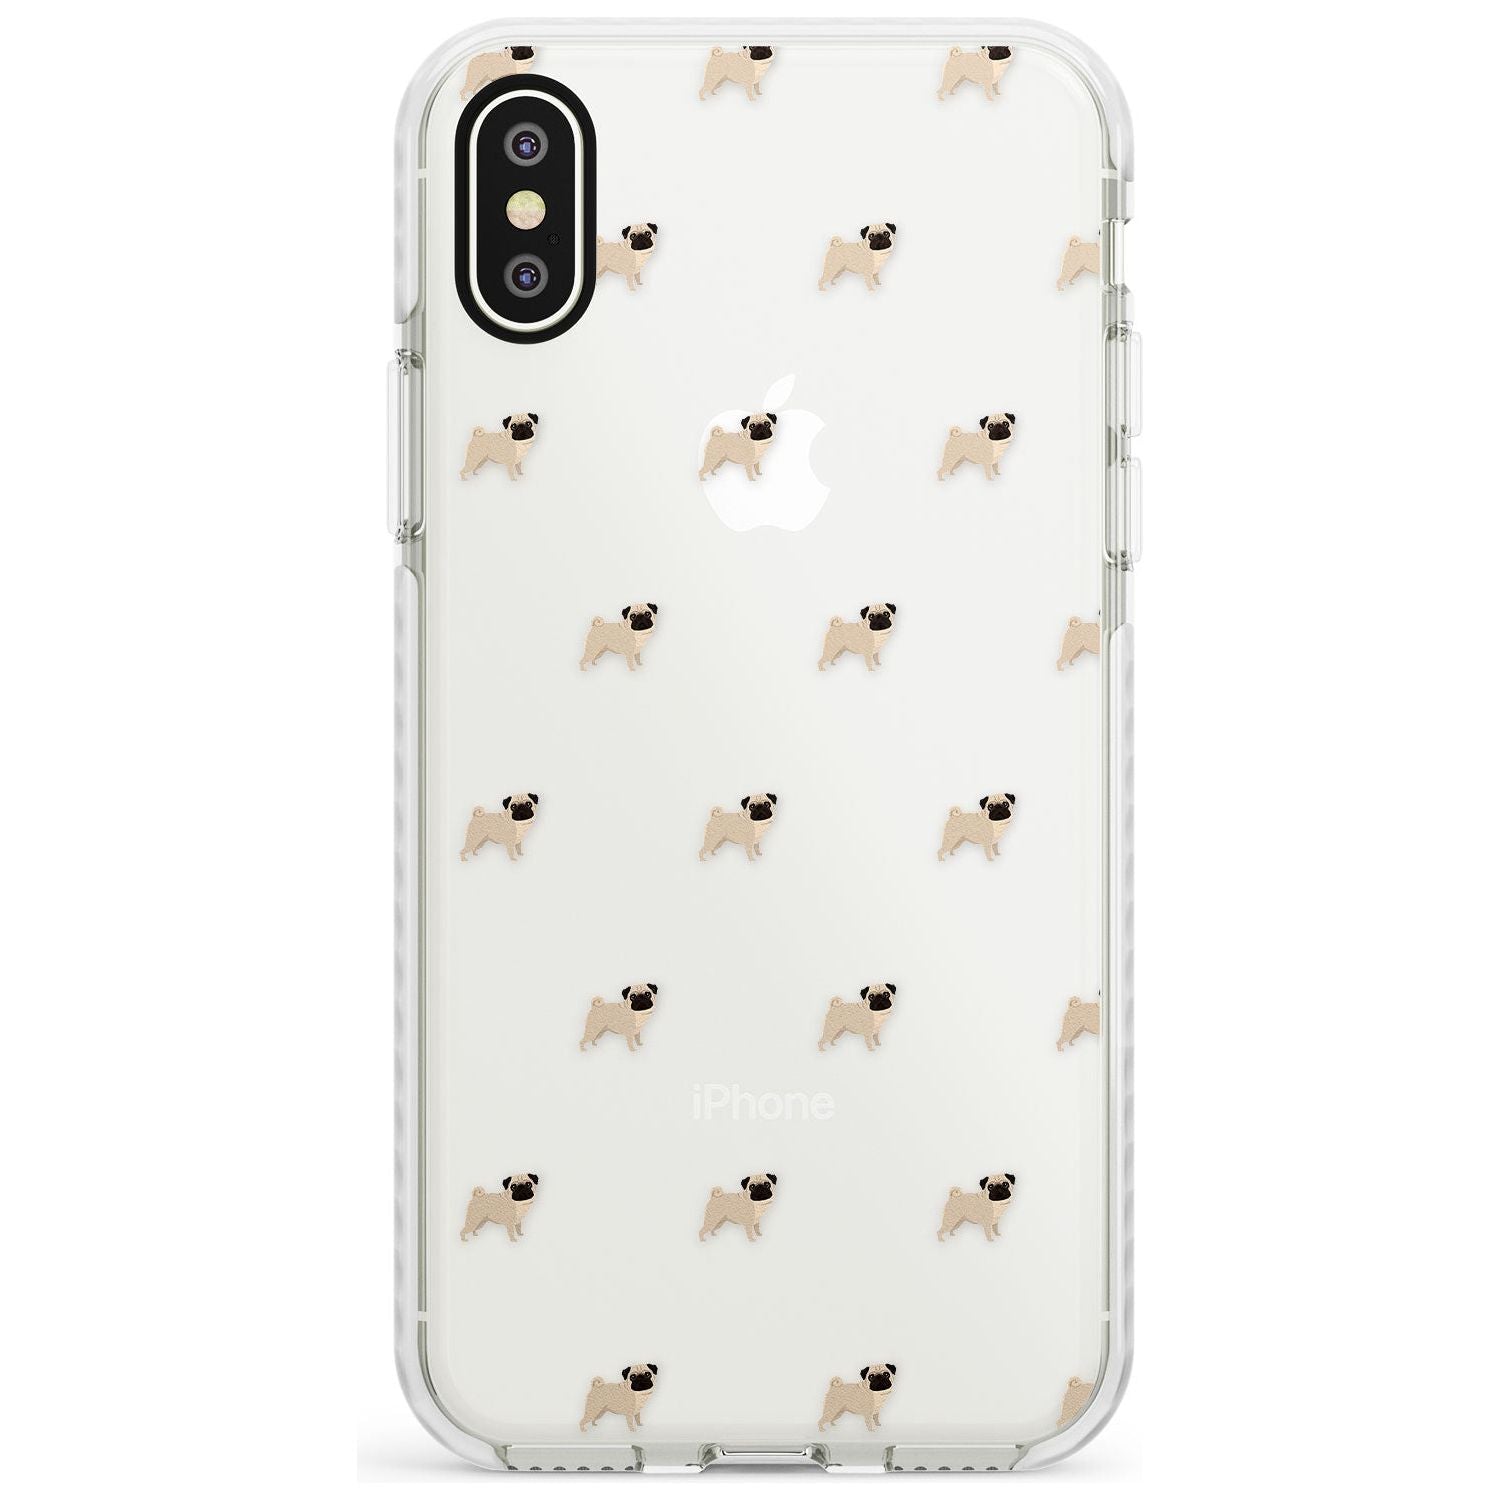 Pug Dog Pattern Clear Impact Phone Case for iPhone X XS Max XR